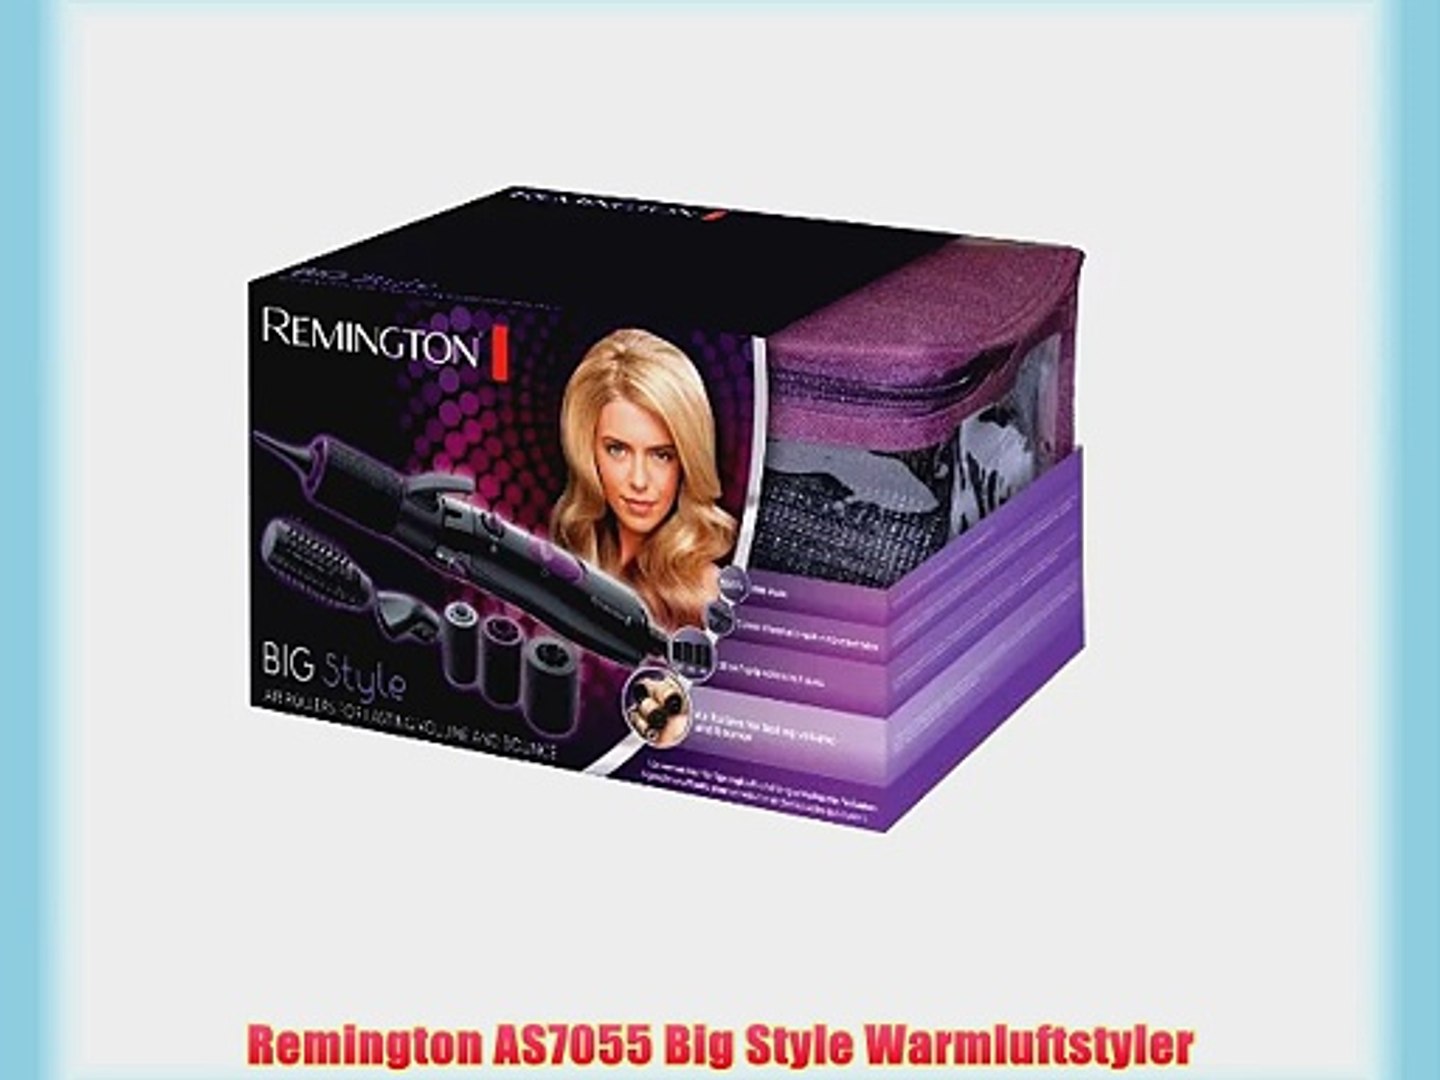 Remington AS7055 Big Style Warmluftstyler - video Dailymotion